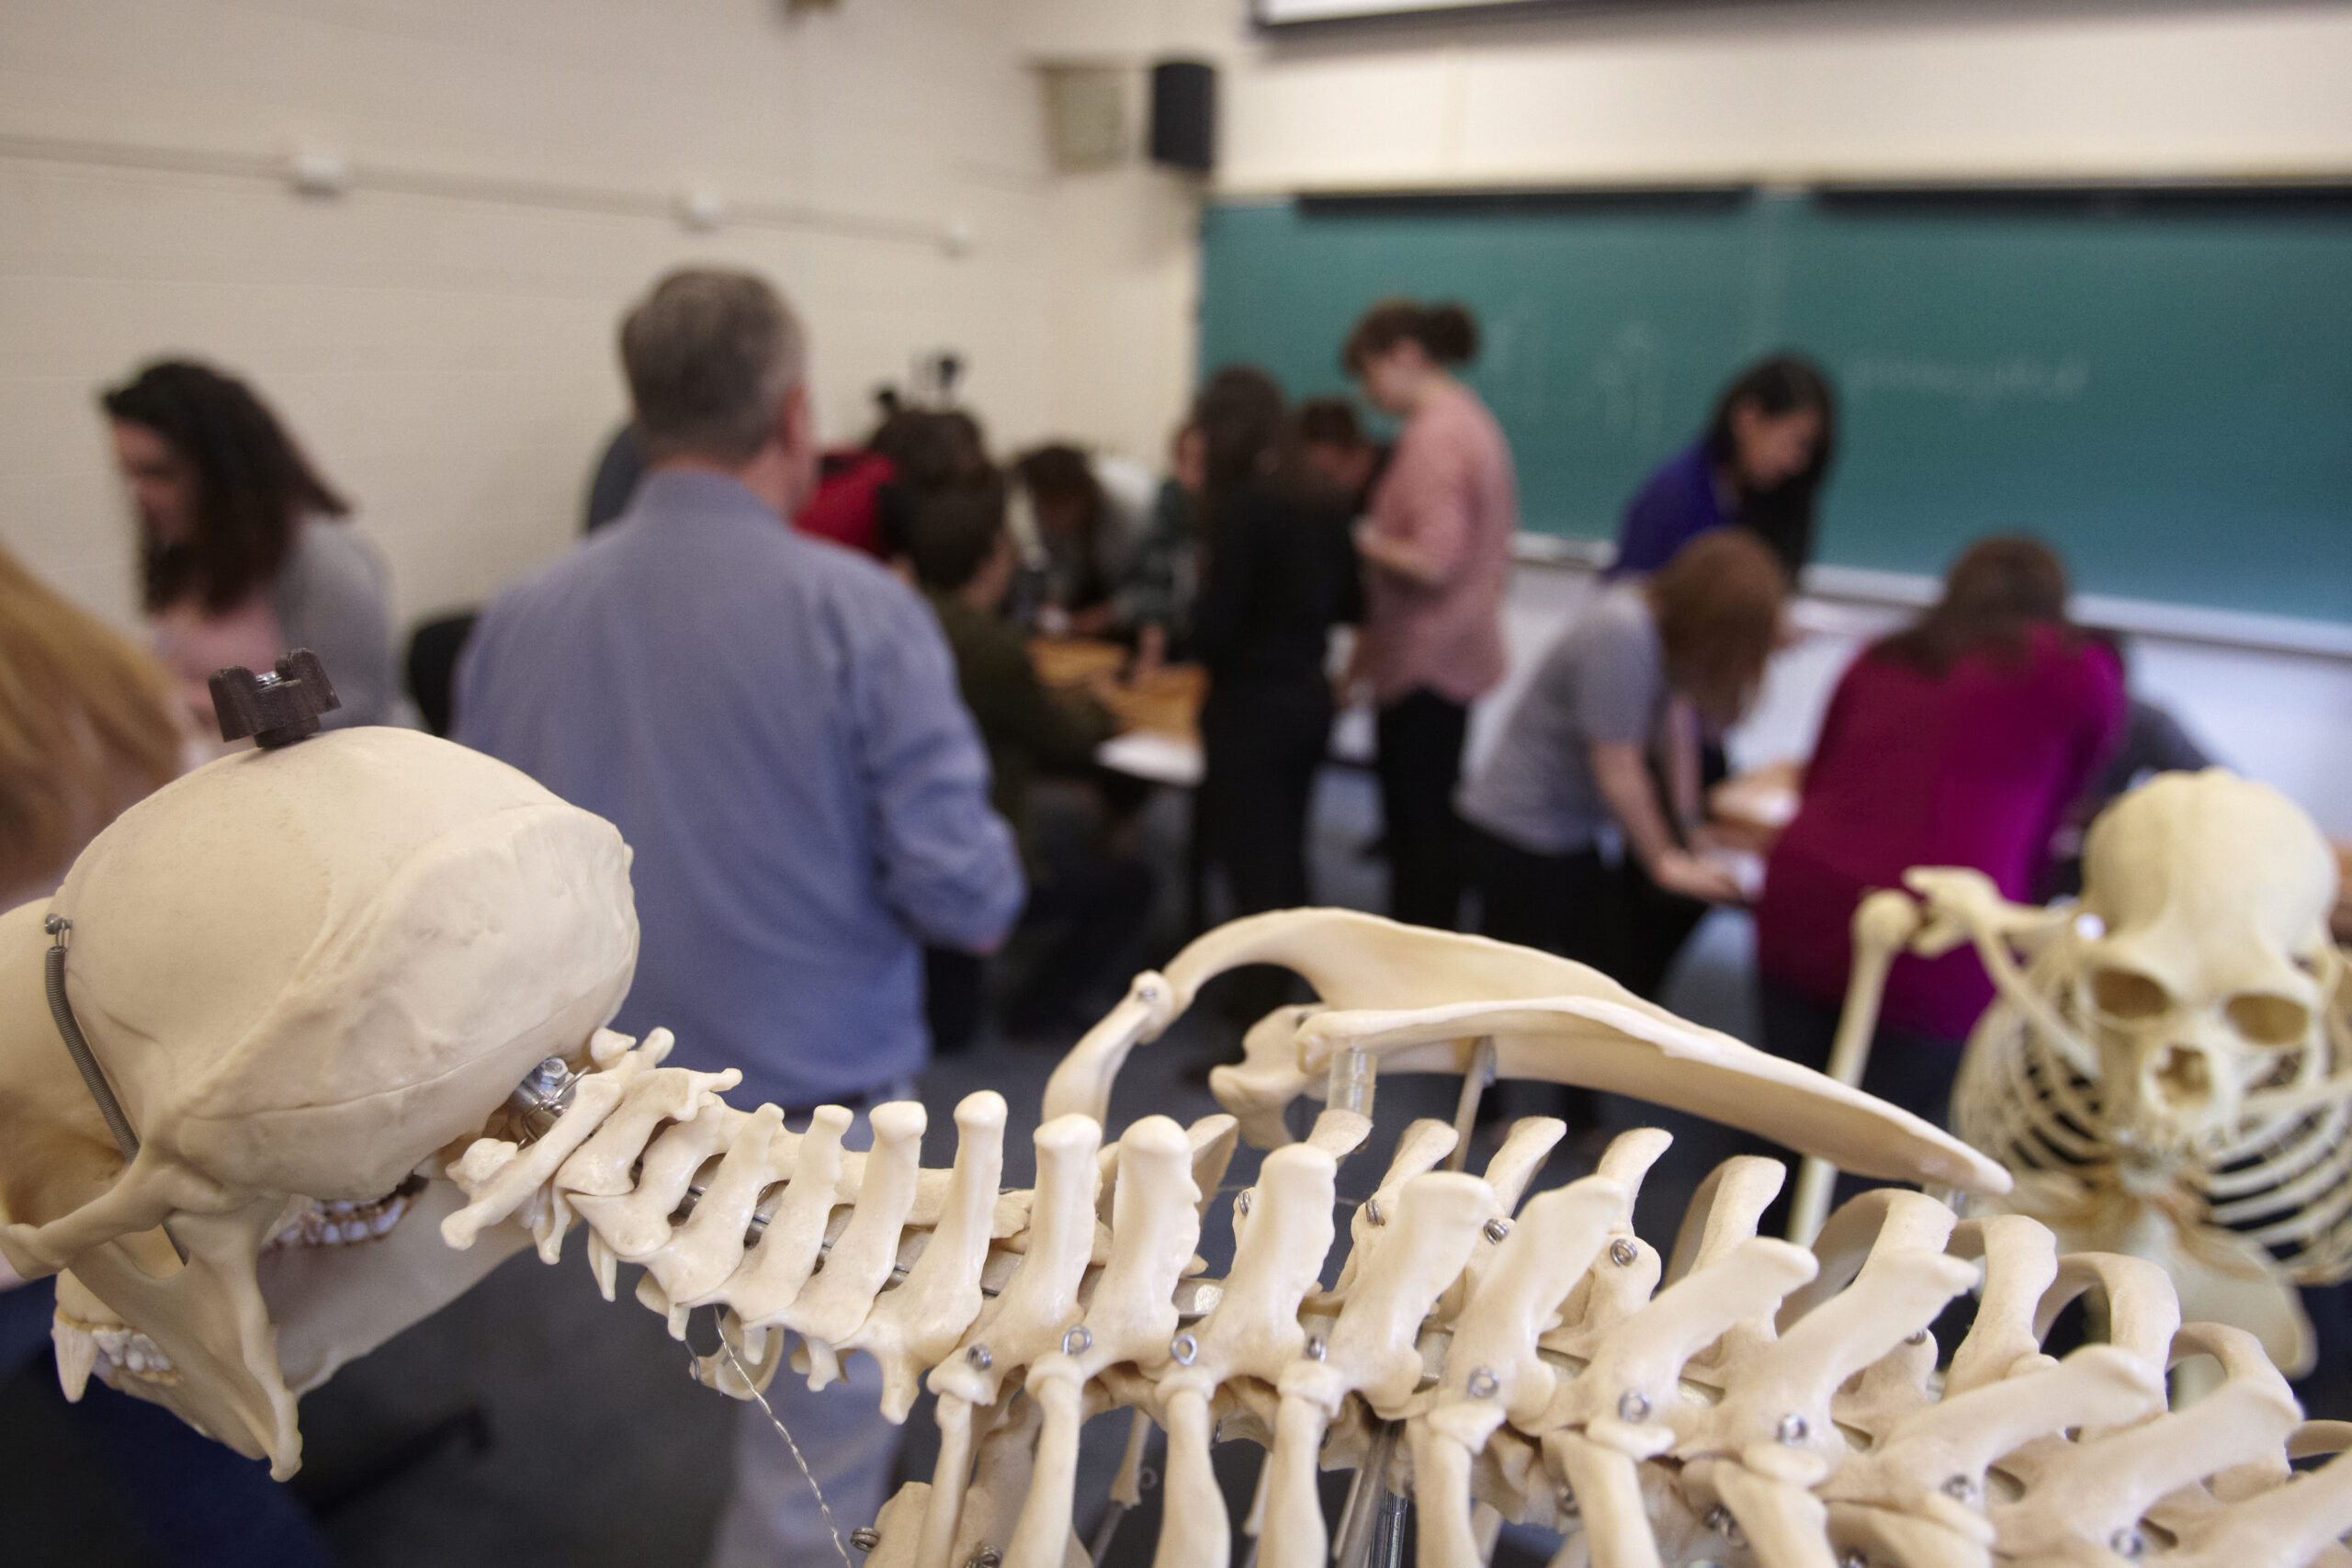 Two models of the human skeleton on display in a classroom.